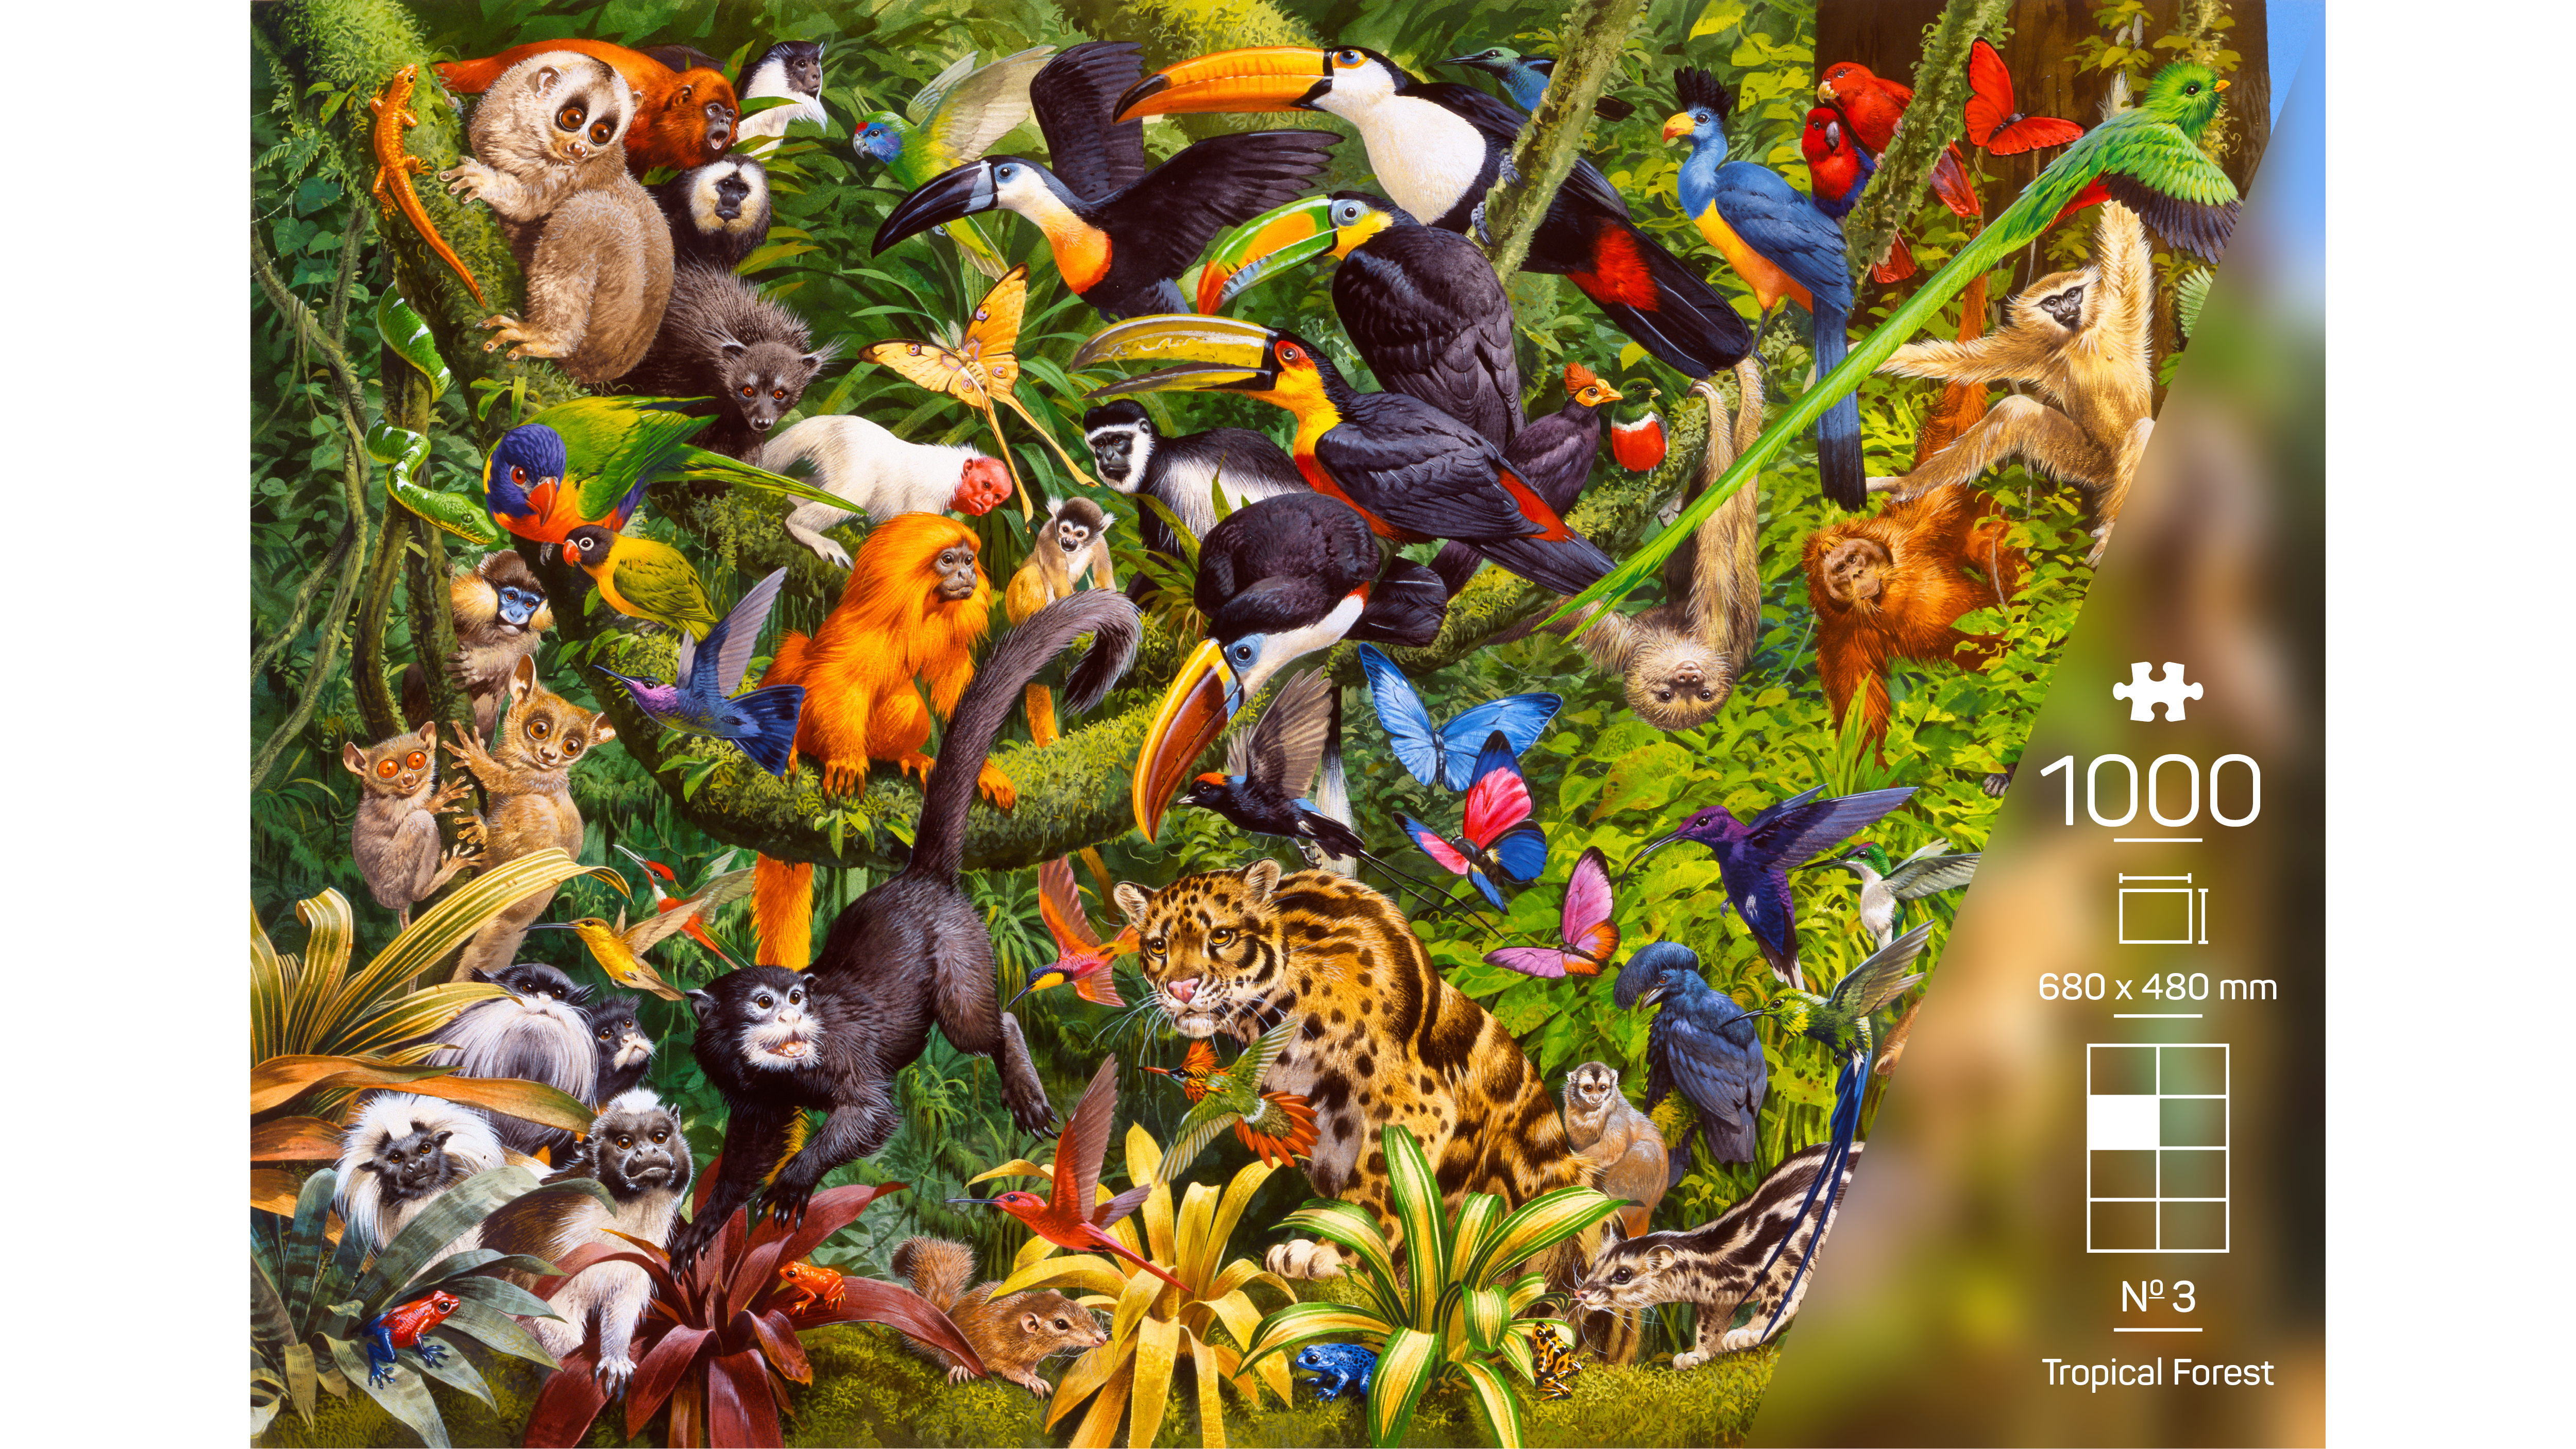 Zoo Tycoon: The Board Game by Treeceratops